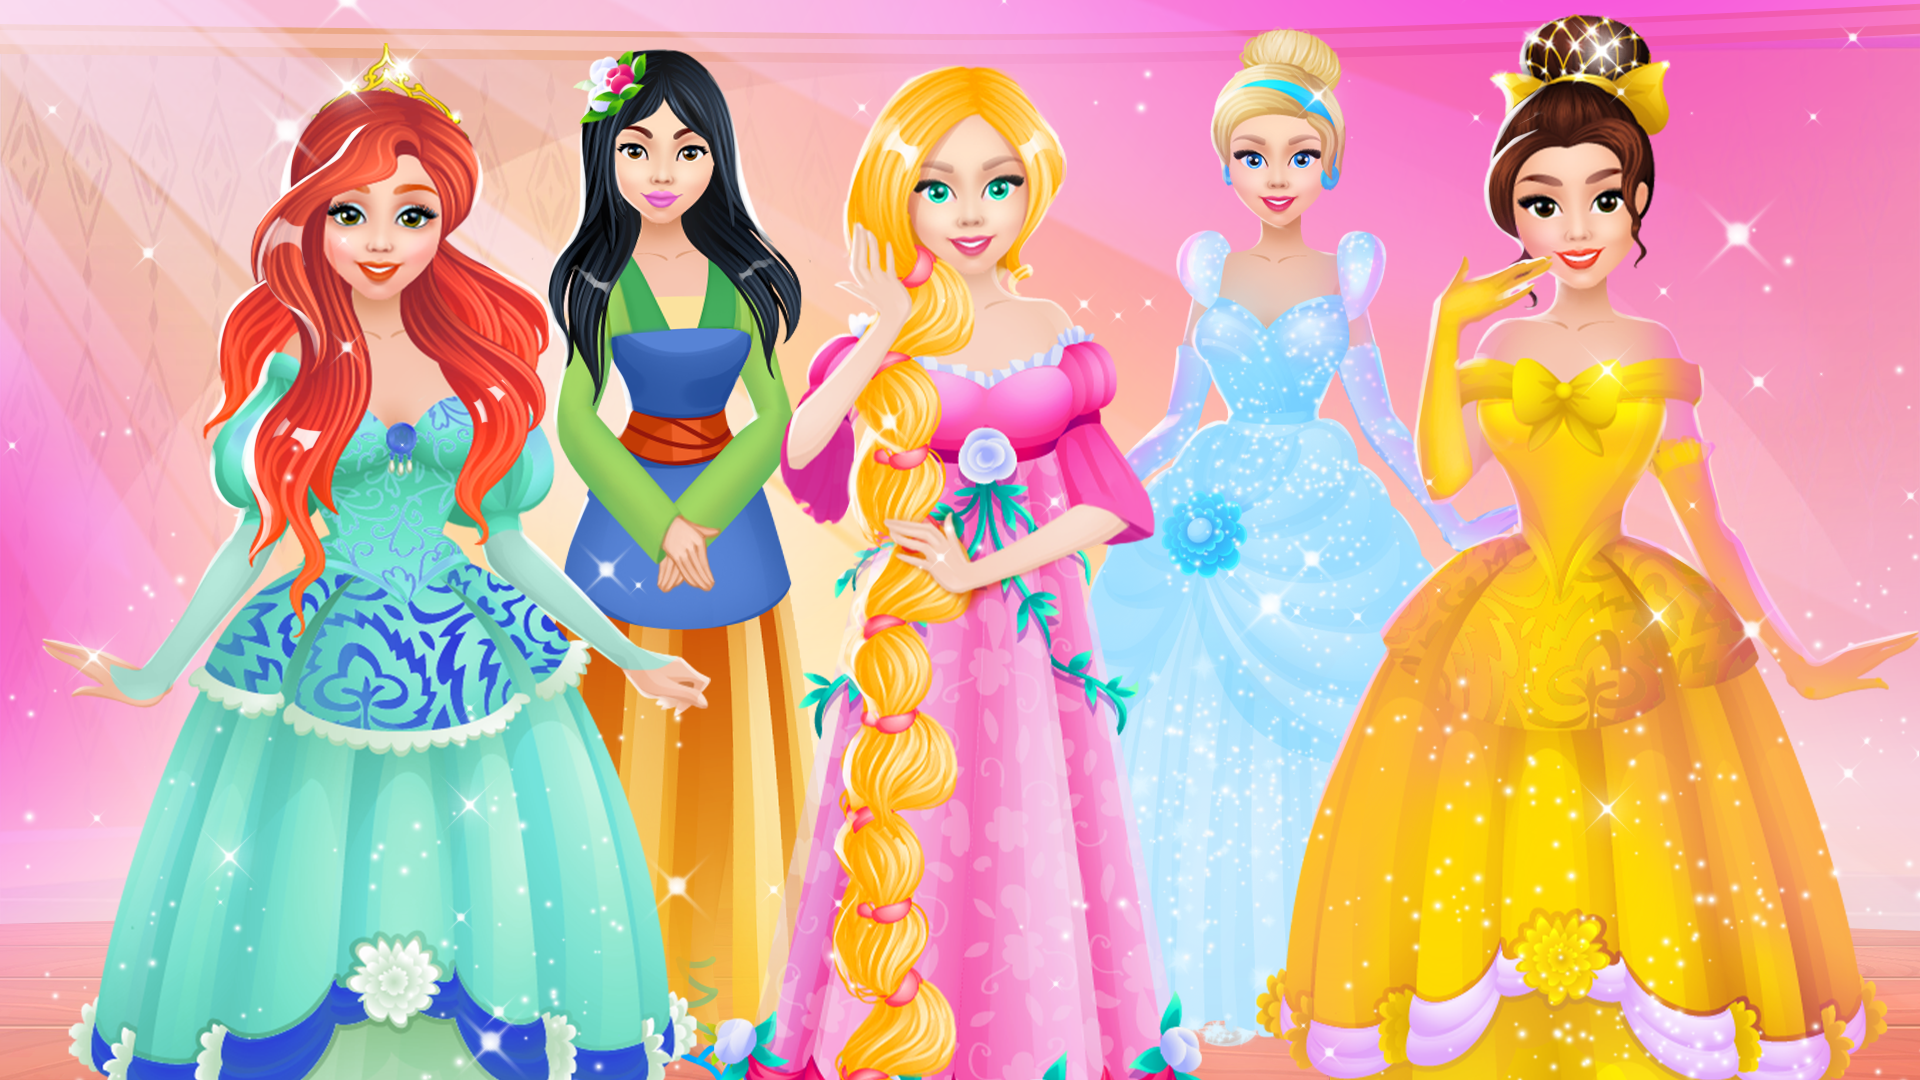 Play Fashion Show Dress Up Game for Girl | Free Online Games. KidzSearch.com